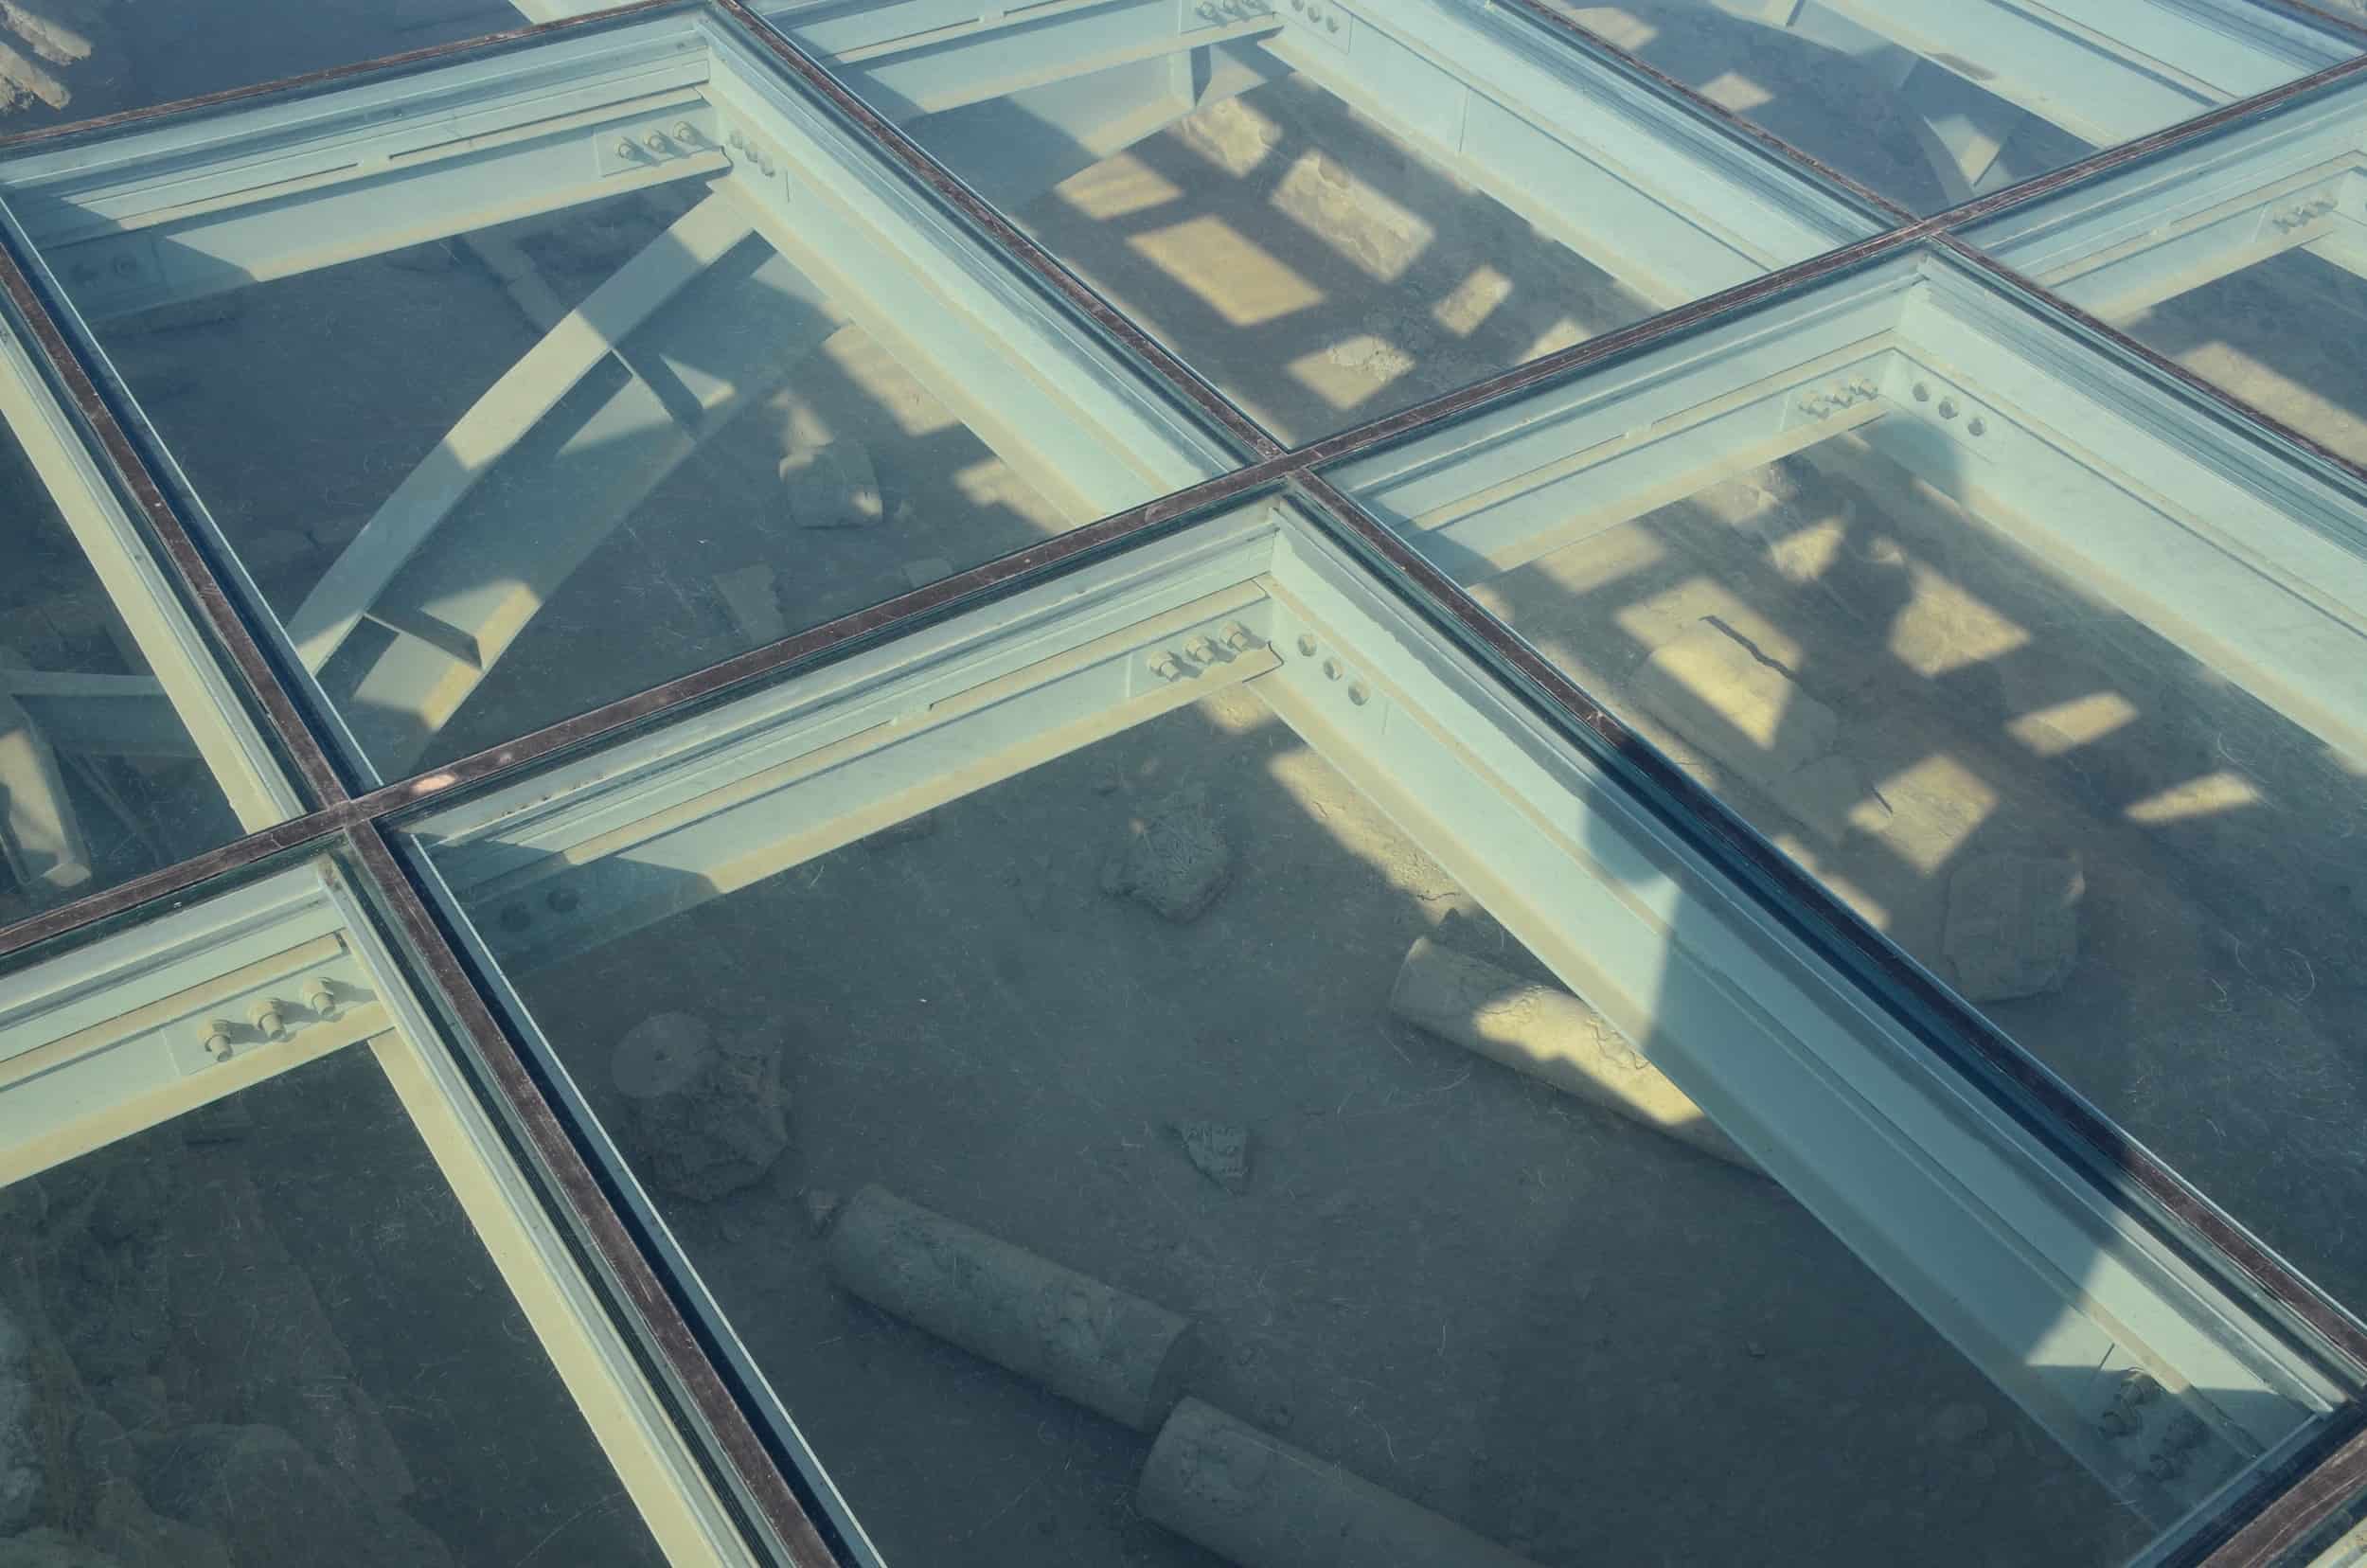 Glass floor of the naos of Temple A